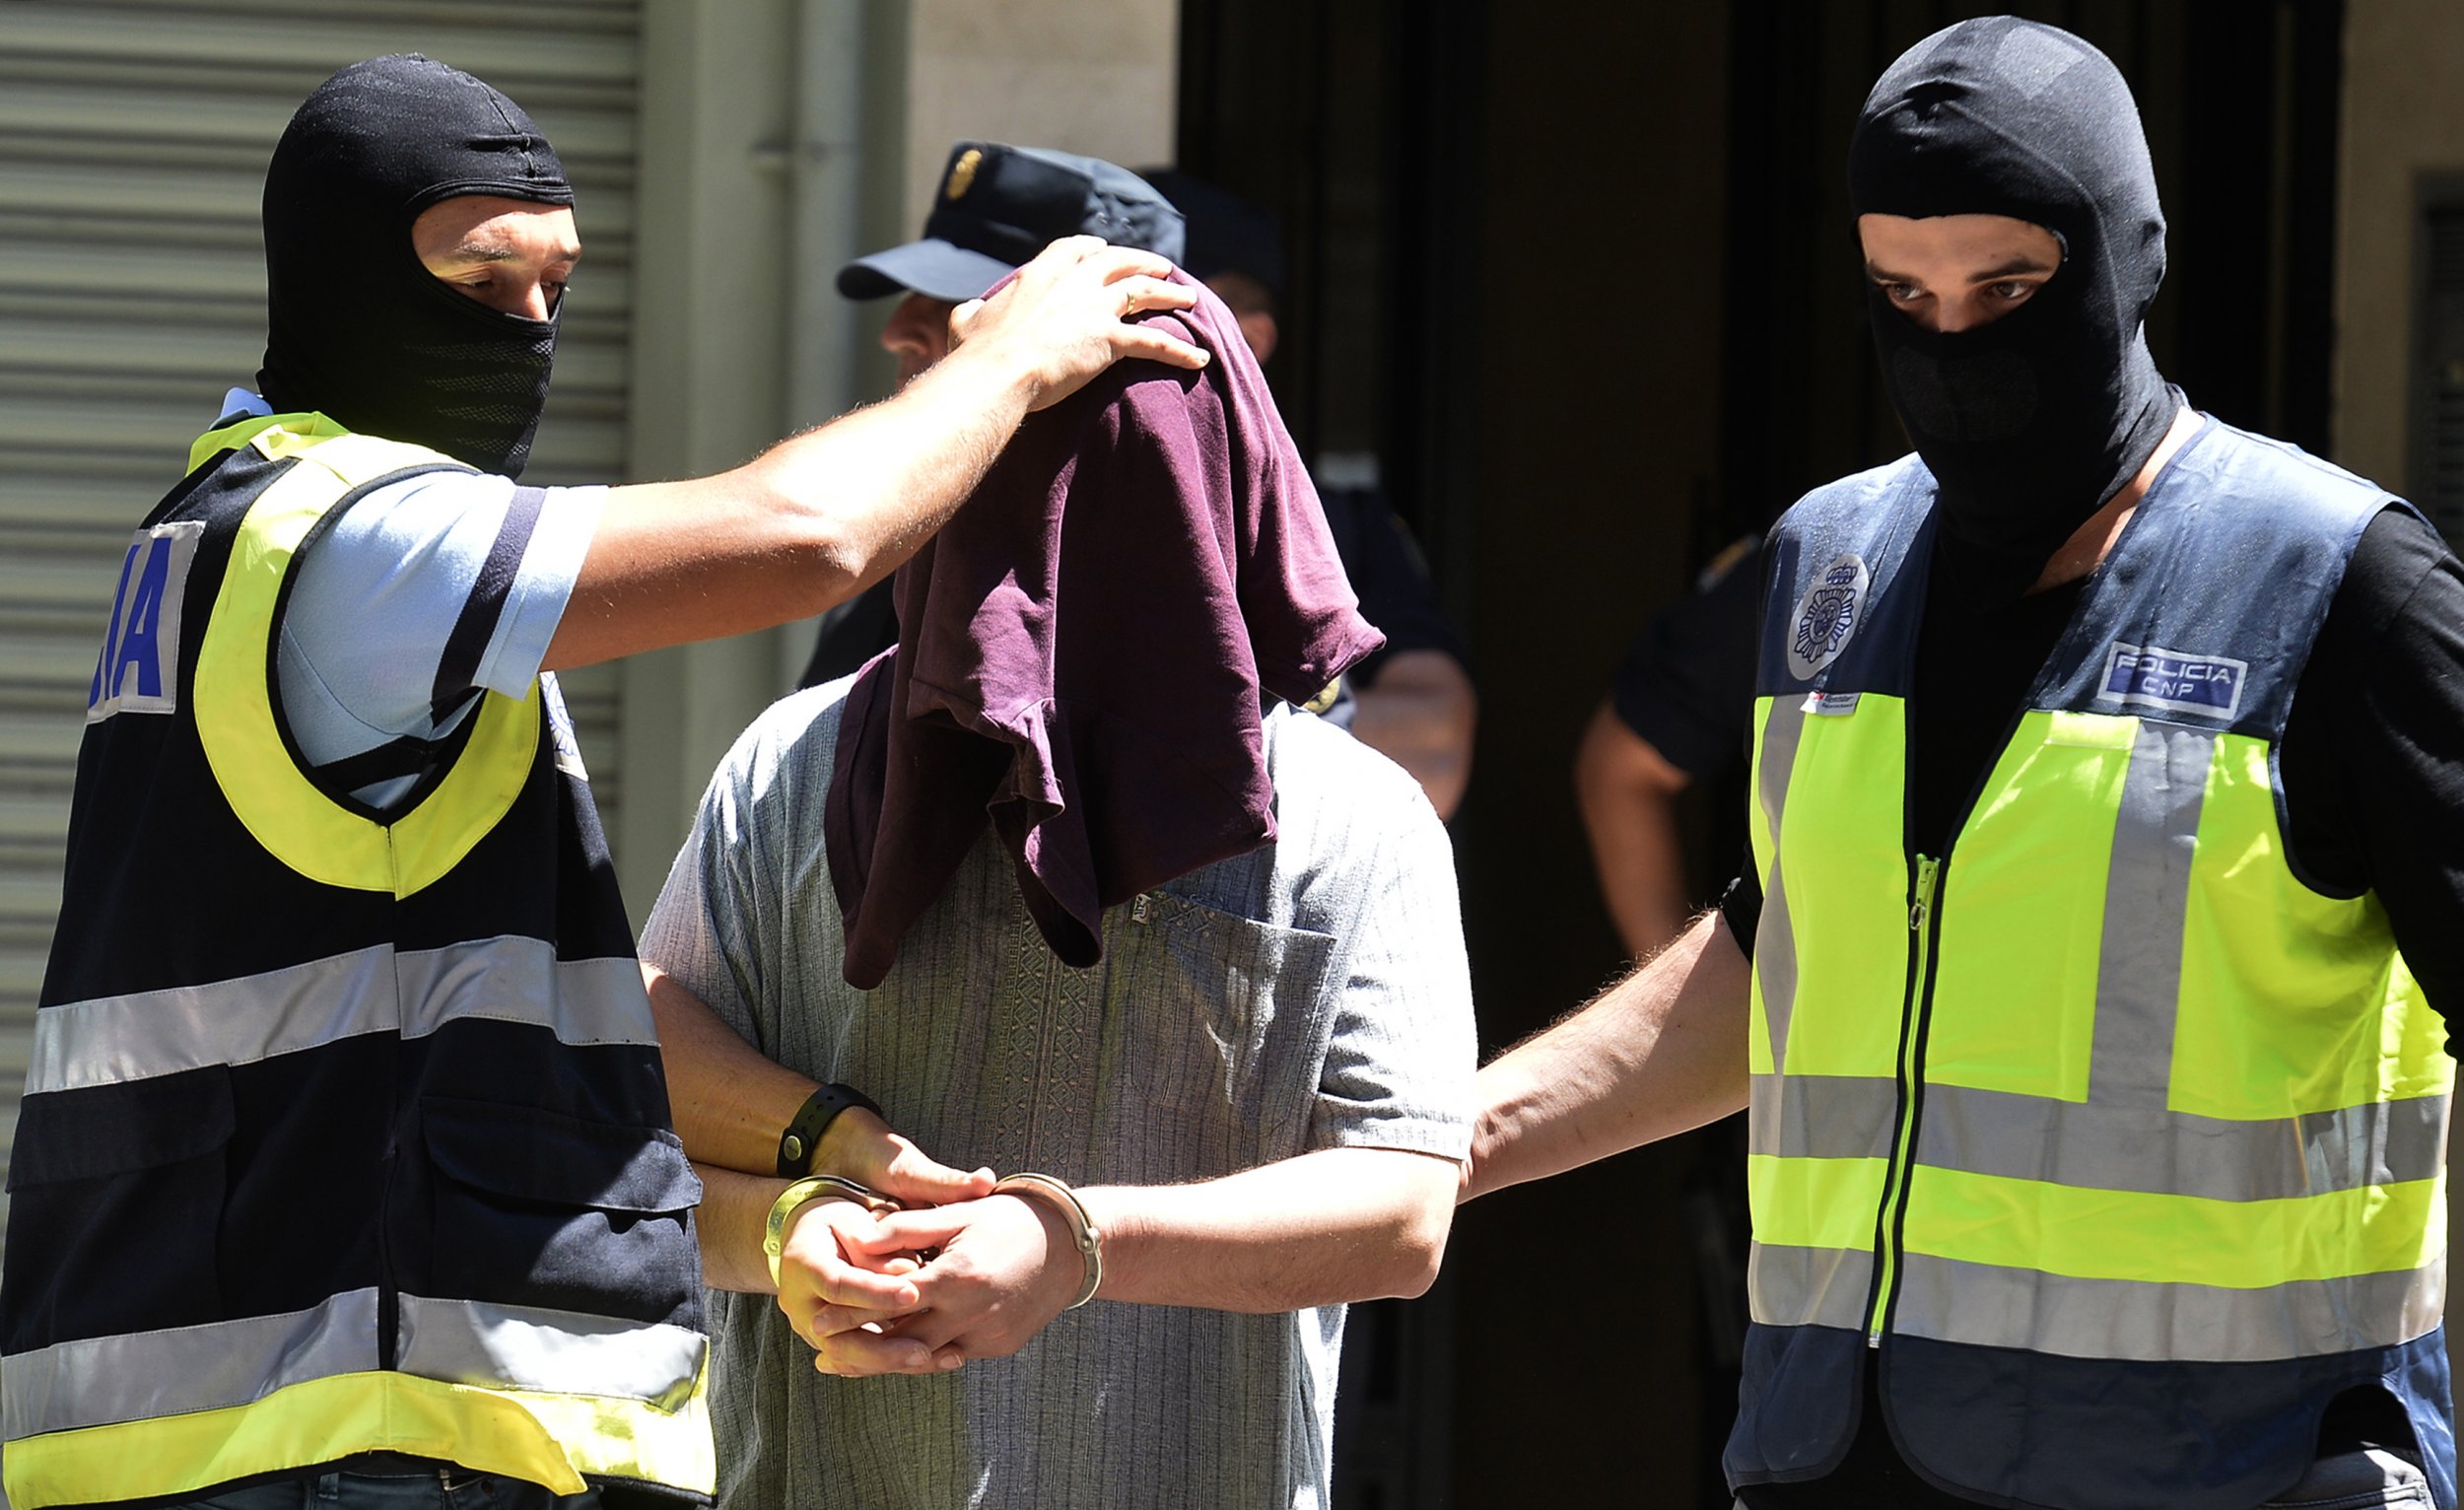 ISIS supporter arrested in Spain